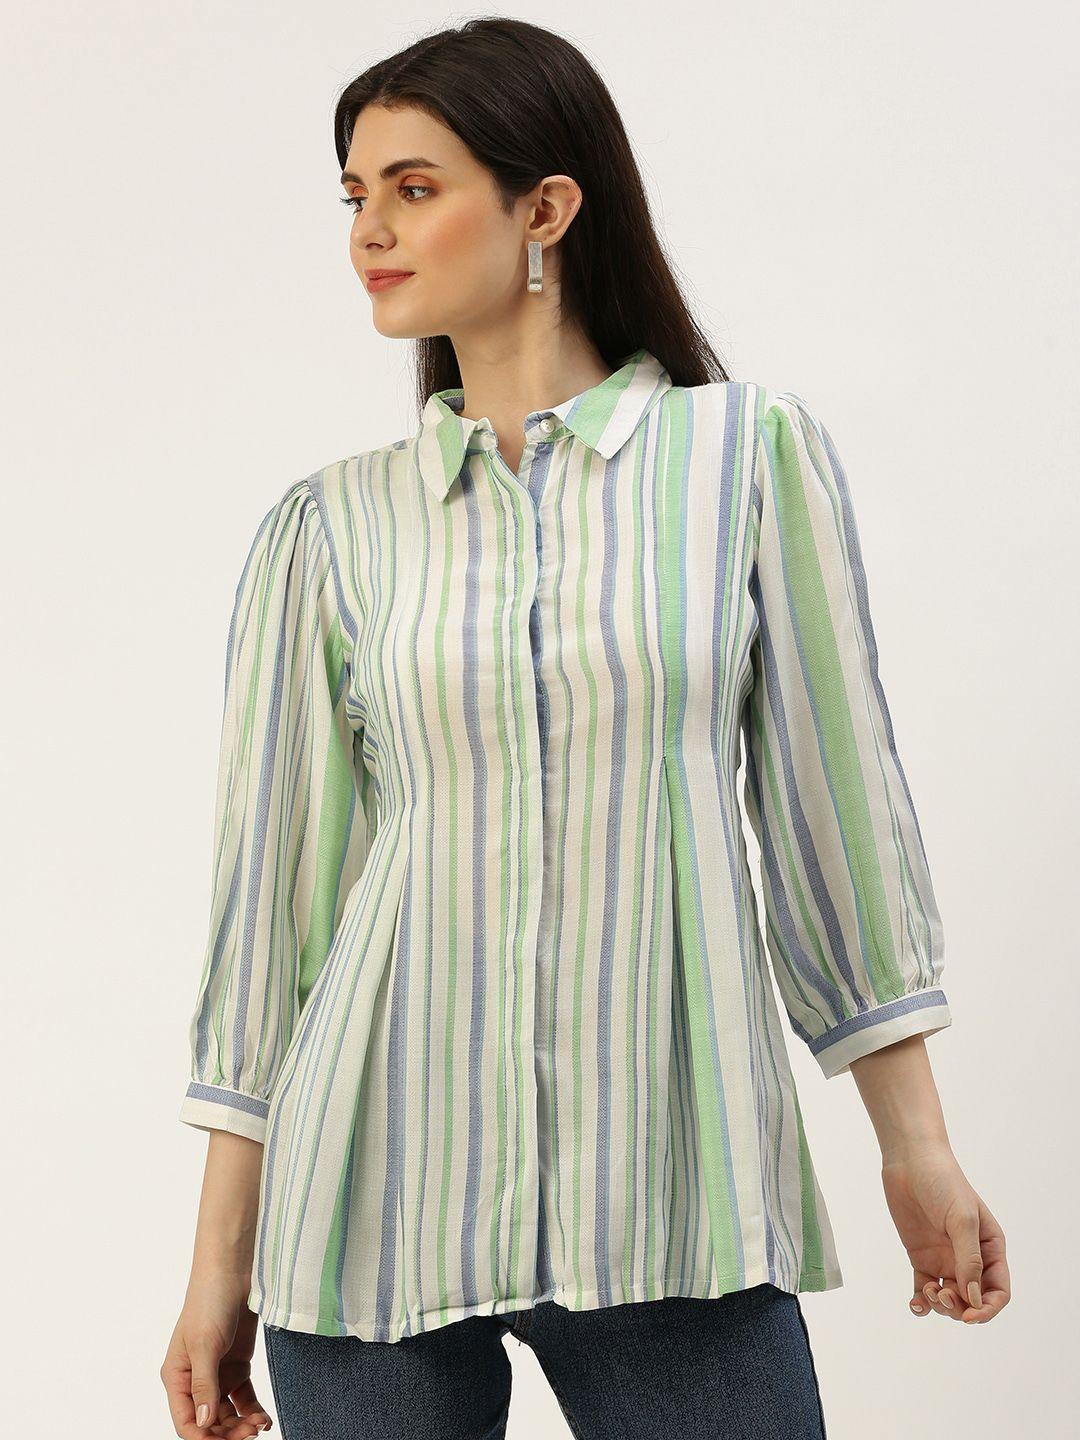 and striped shirt style top with pleated detail